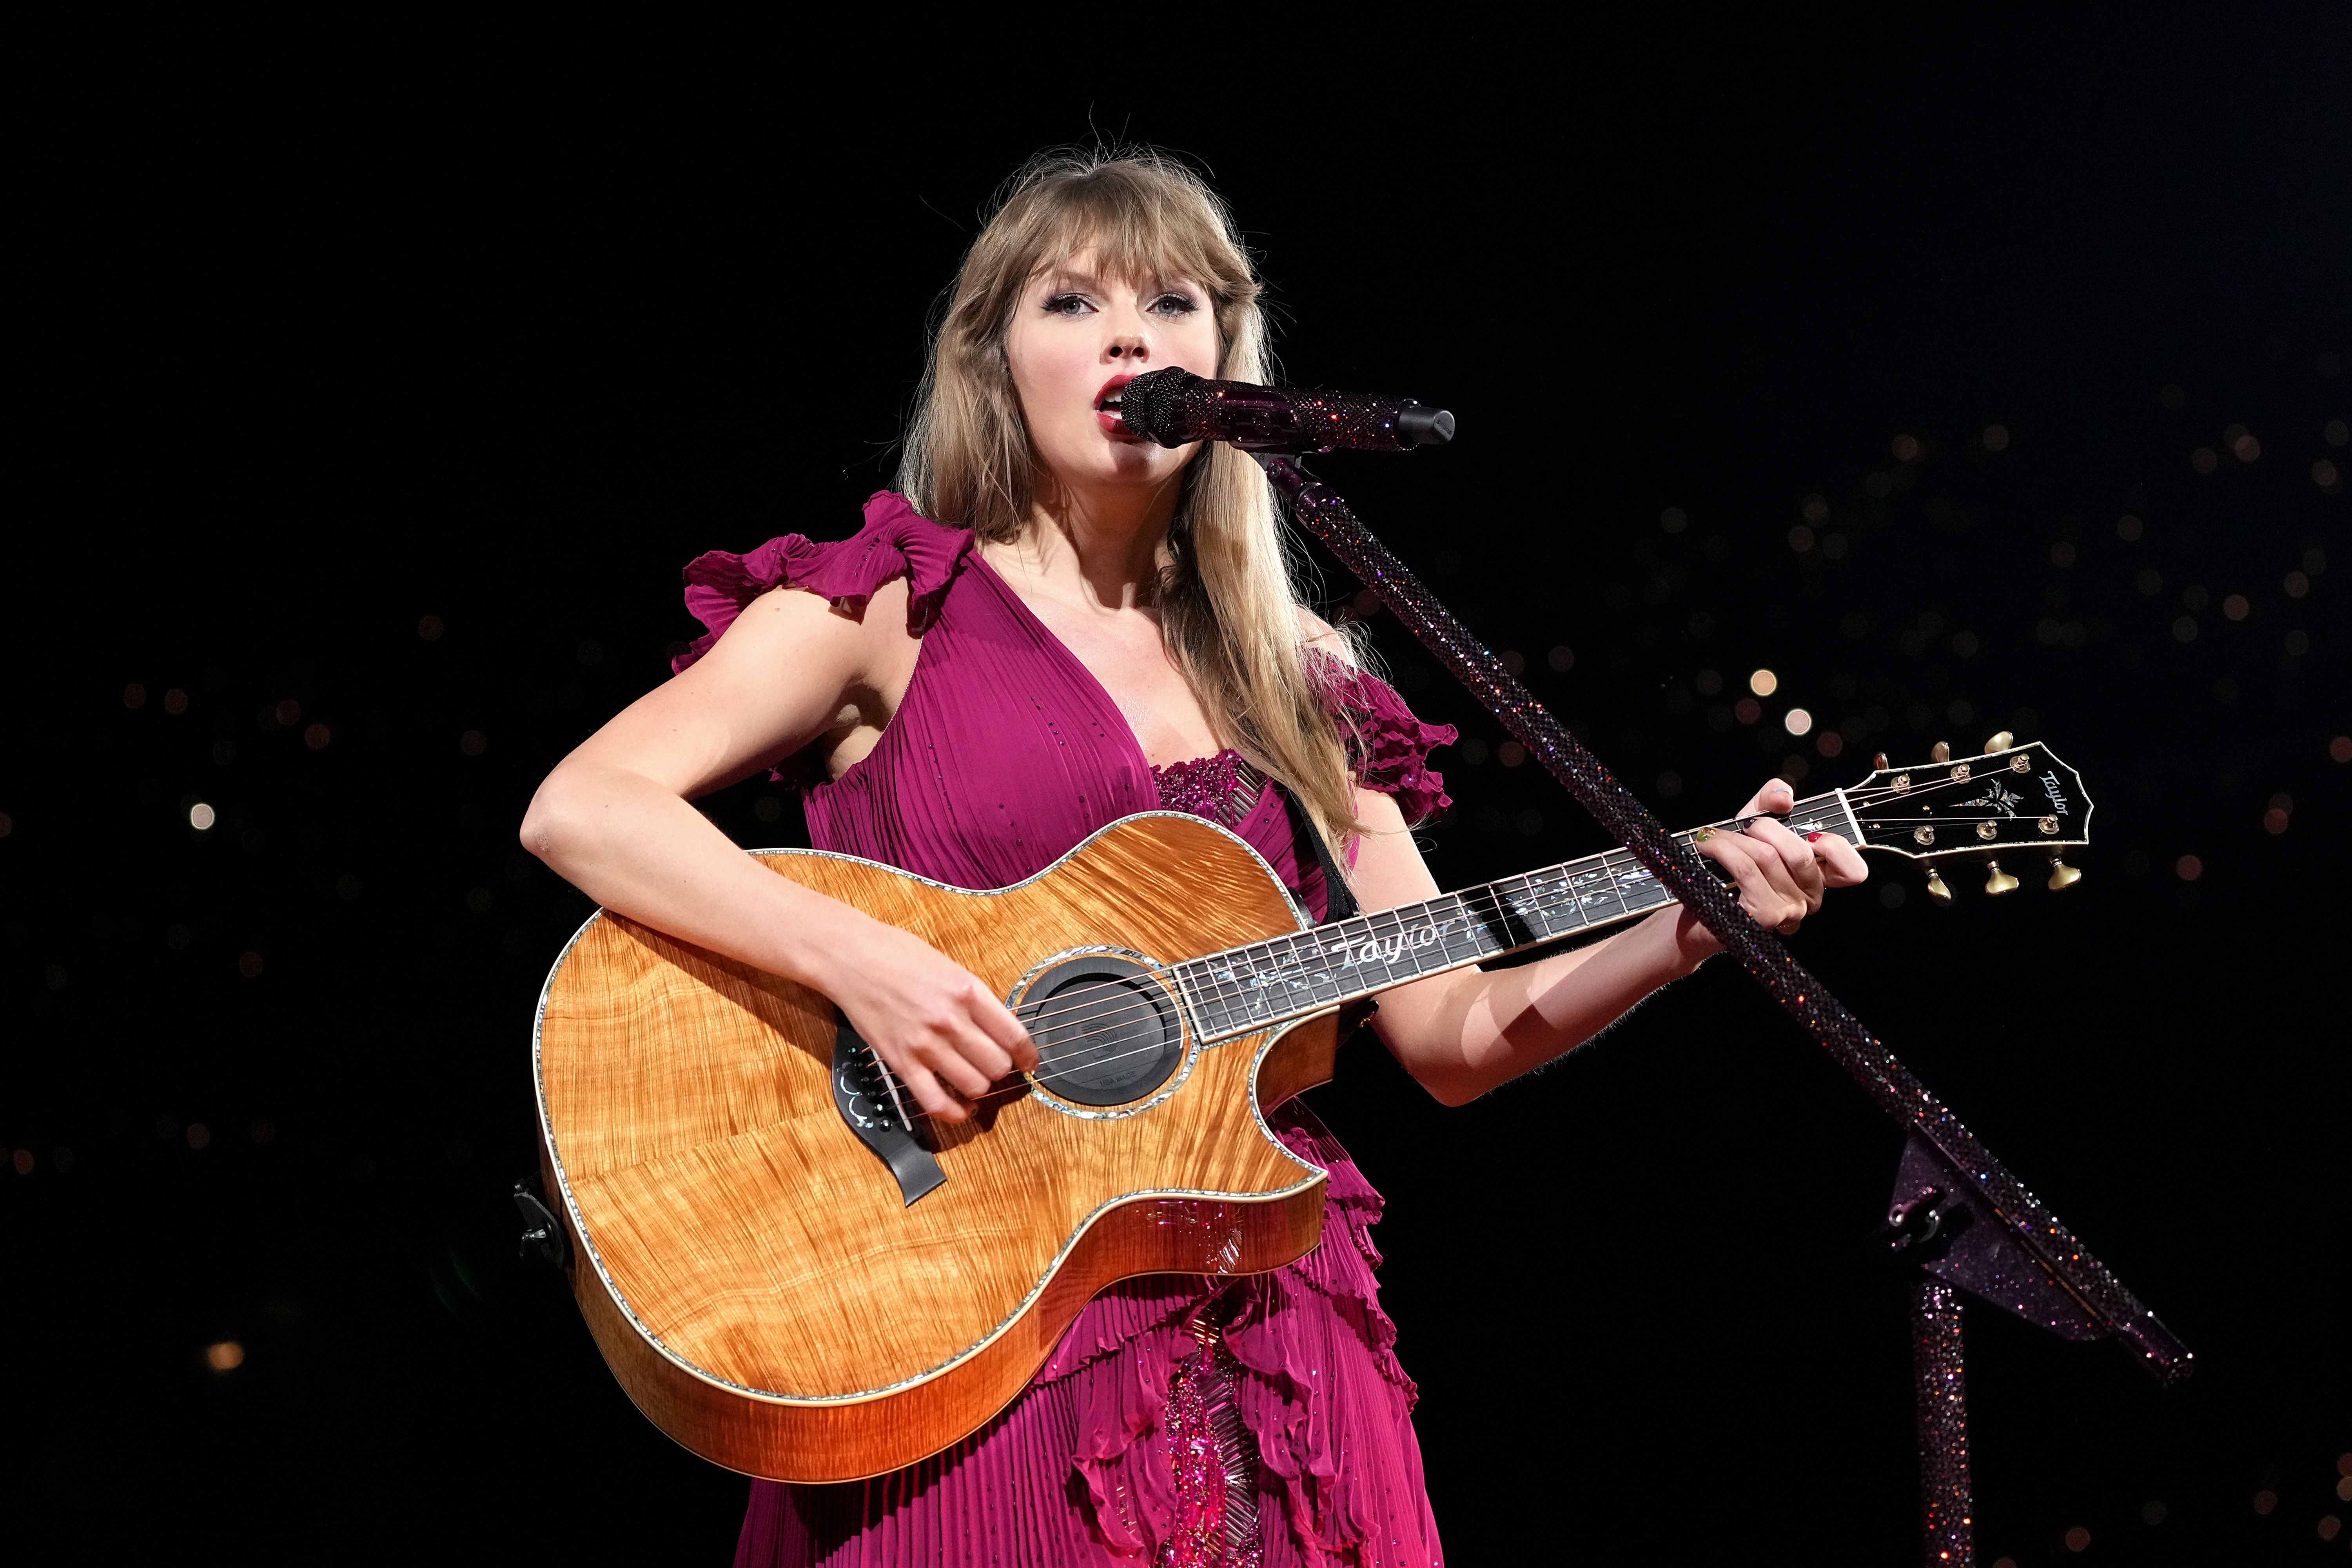 Taylor Swift Era's Tour Friendship Bracelets: Why Fans Are Trading